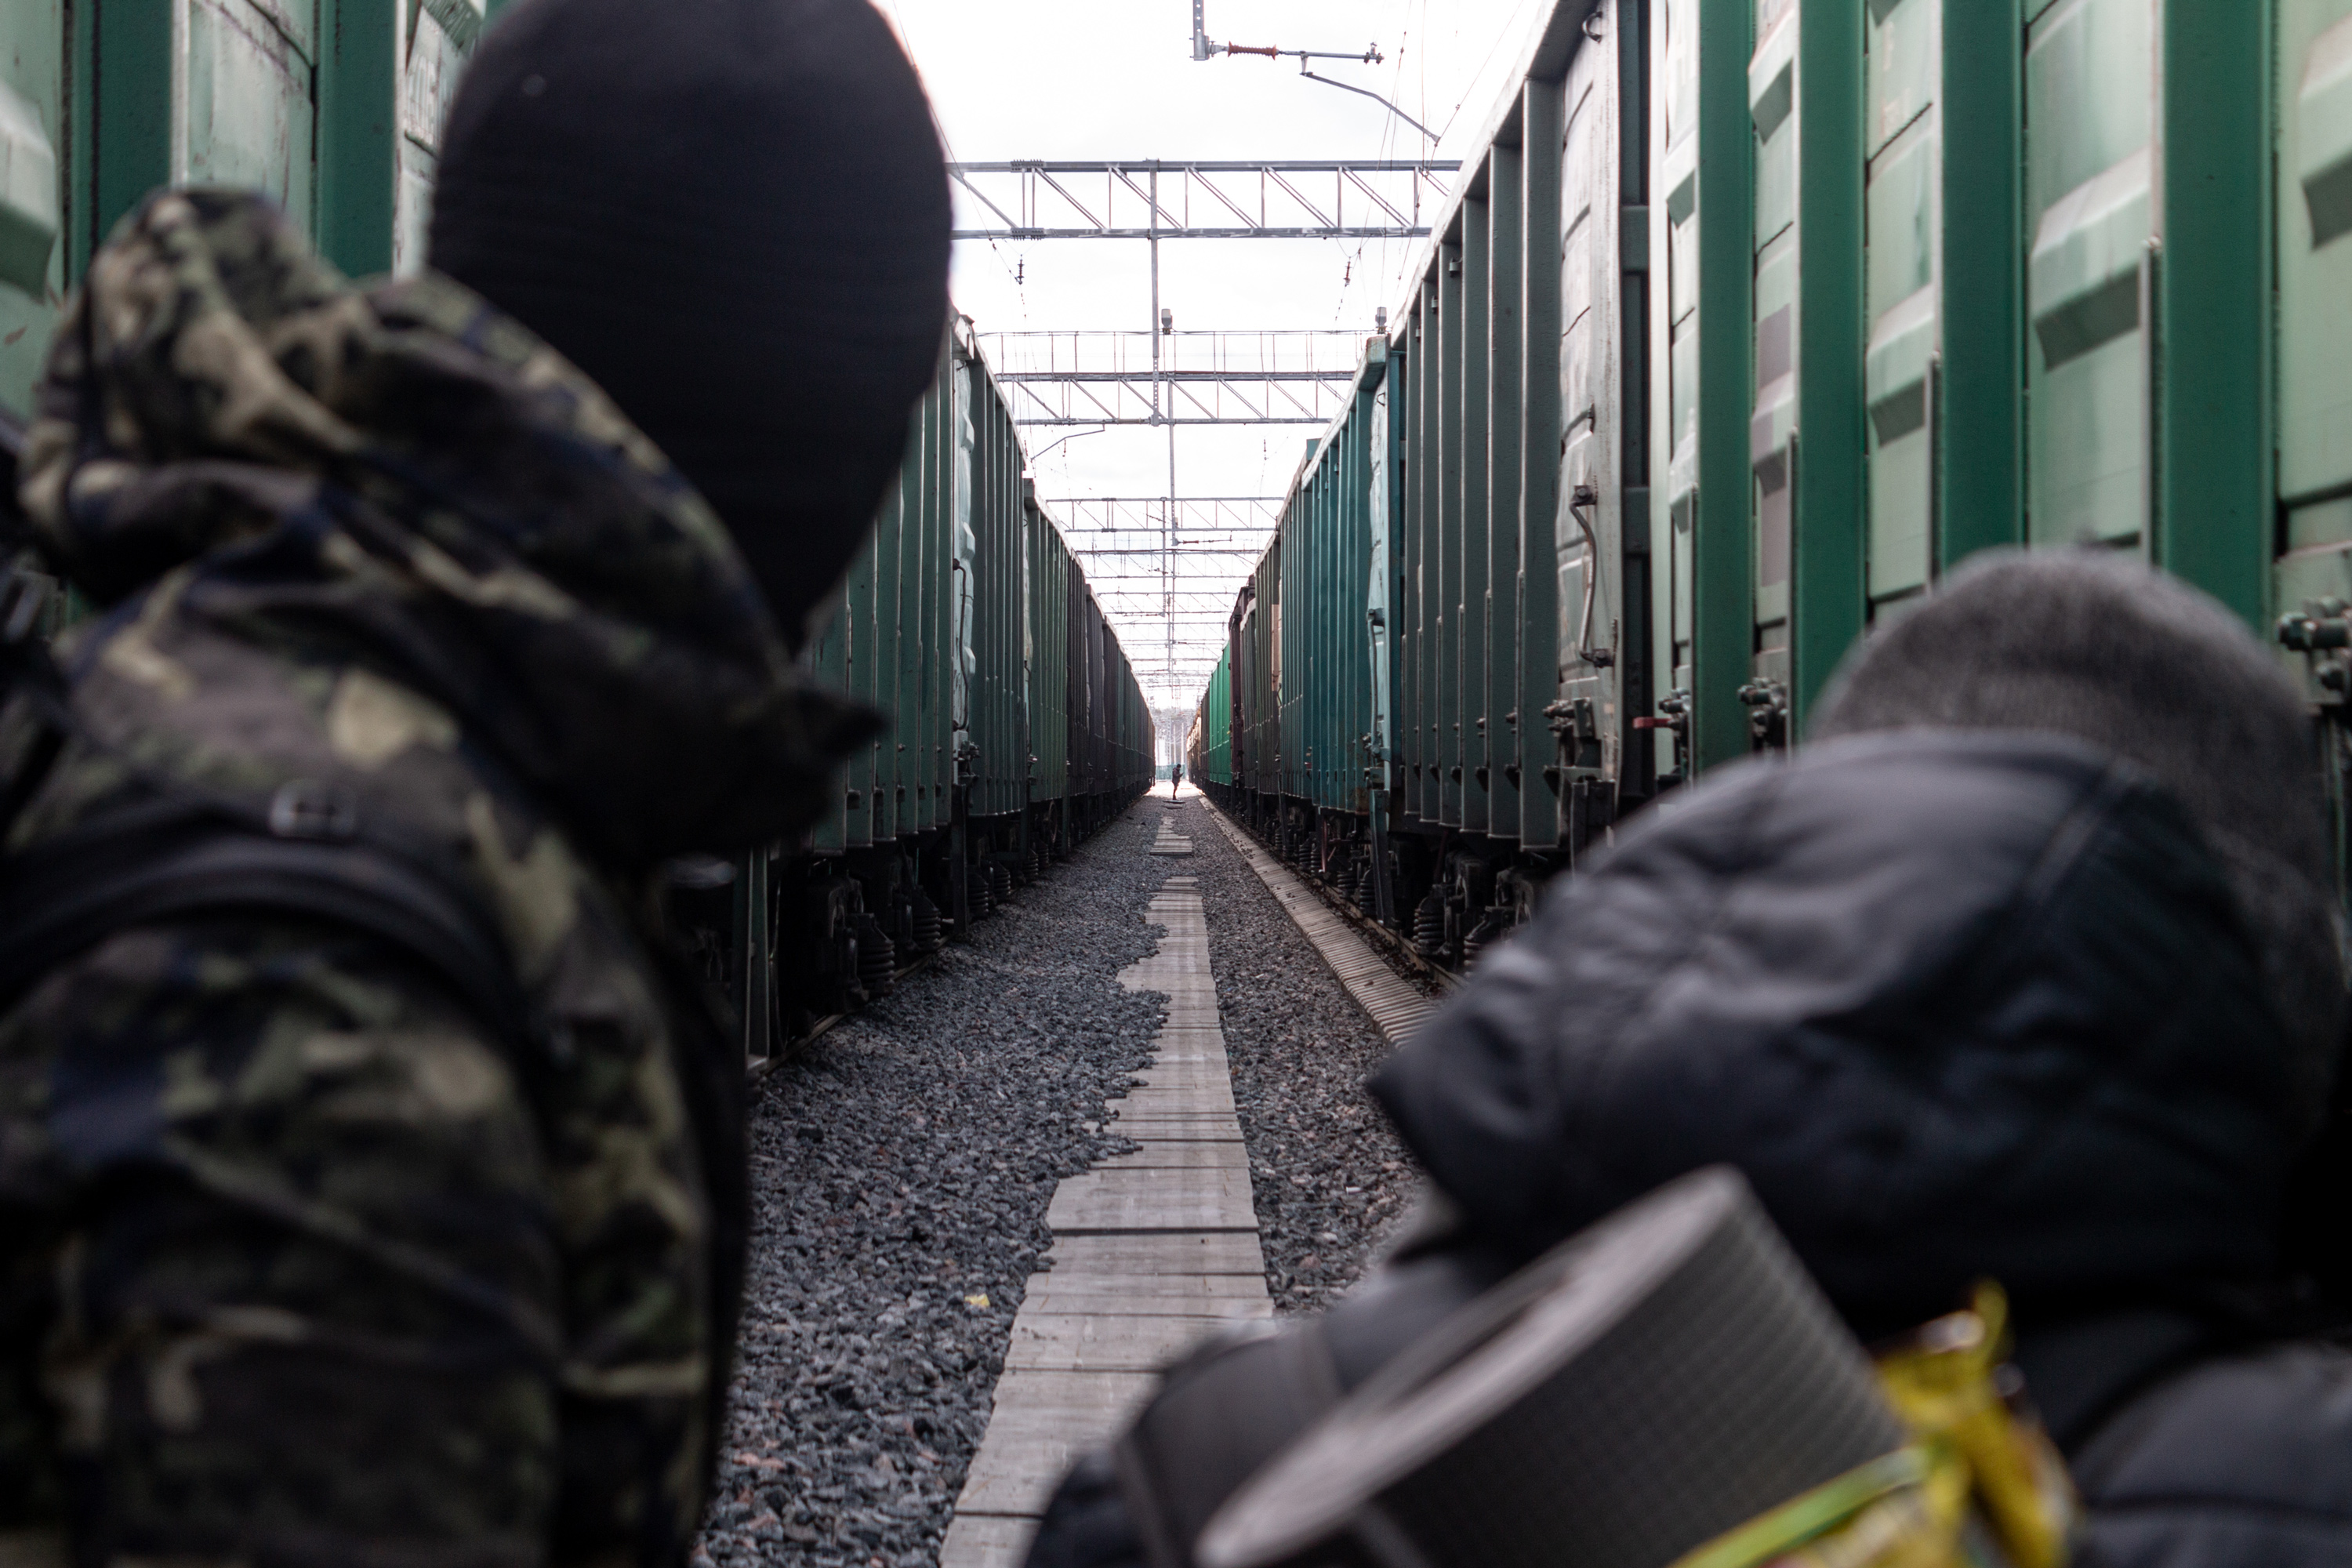 Artem and Maxim watching an unidentified person between the tracks in the rail yard. If a staff member sees them, they might report to the head of the station, and the guys will be detained by security.